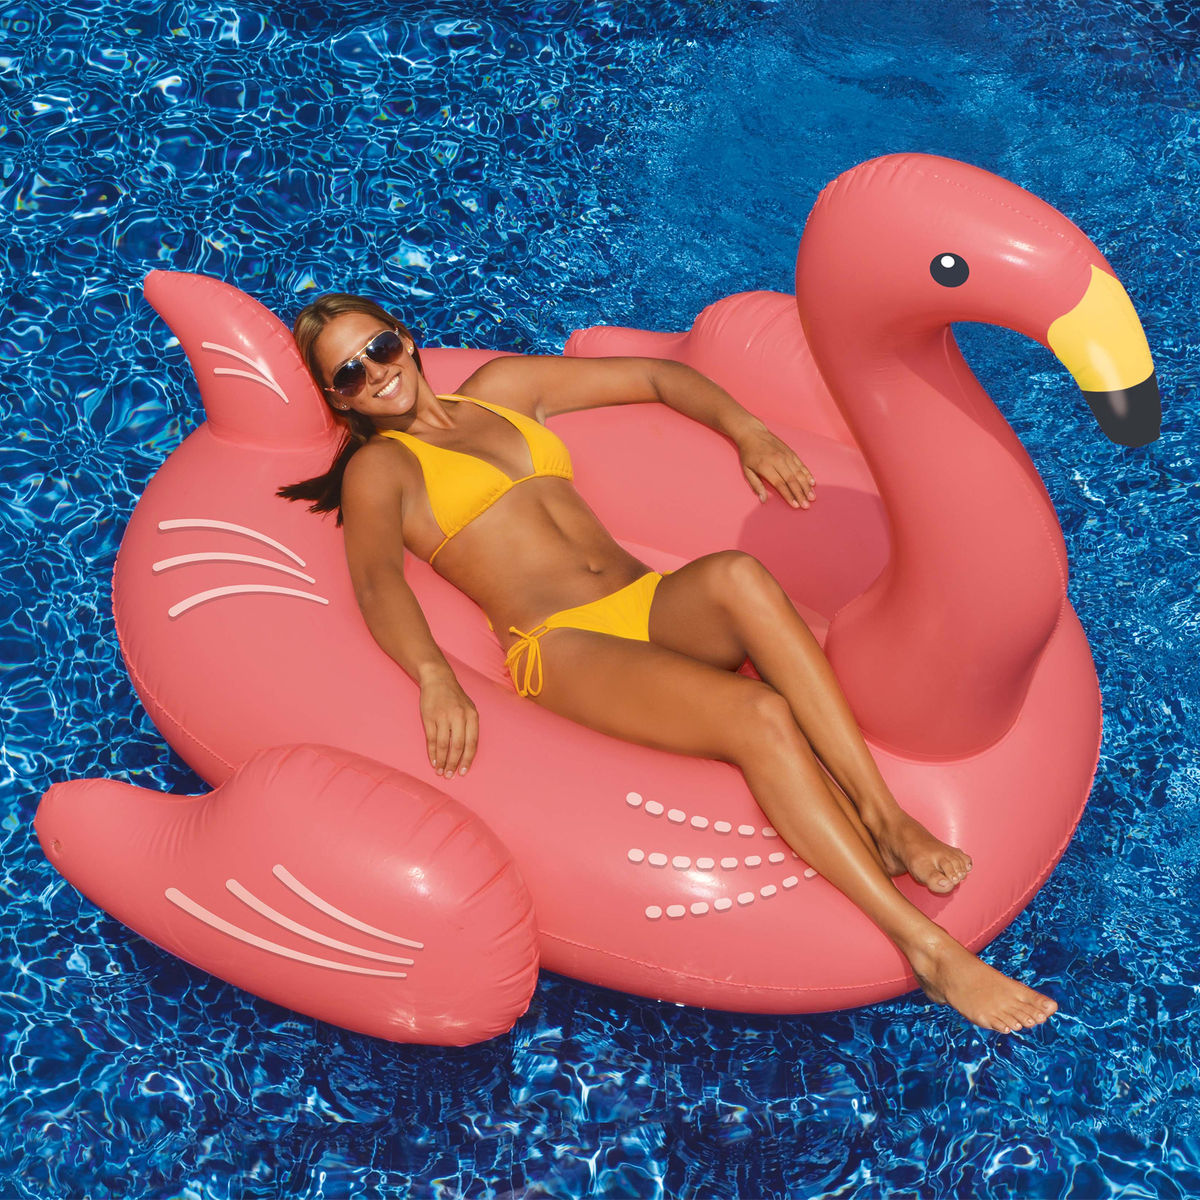 https://cdn.shopify.com/s/files/1/1569/9003/products/giant-flamingo-from-swimline-3.gif?v=1542744277